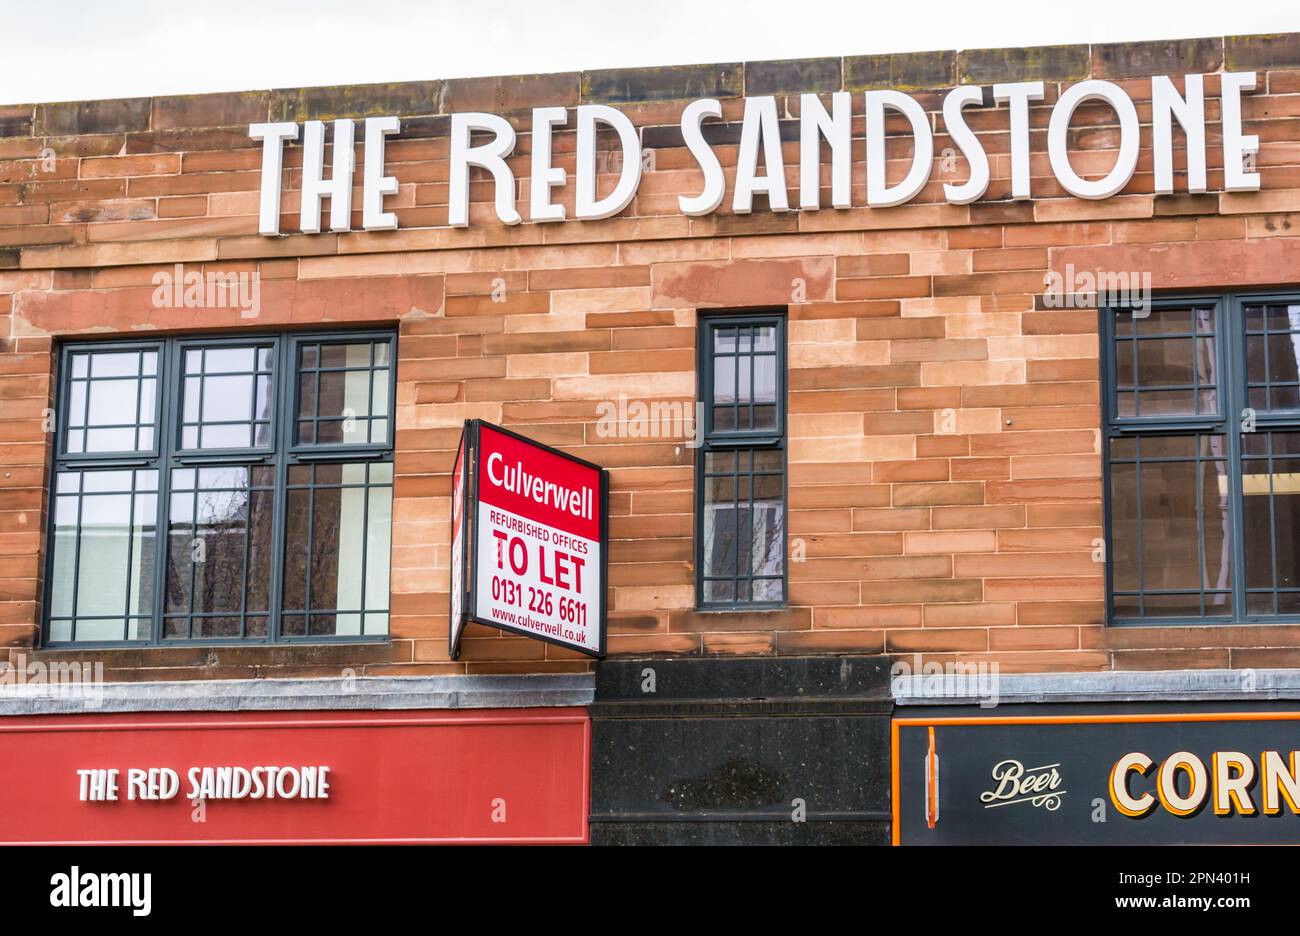 Newly restored 1930s Art Deco style The Red Sandstone building on Leith Walk with offices to let advertising sign, Edinburgh, Scotland, UK Stock Photo